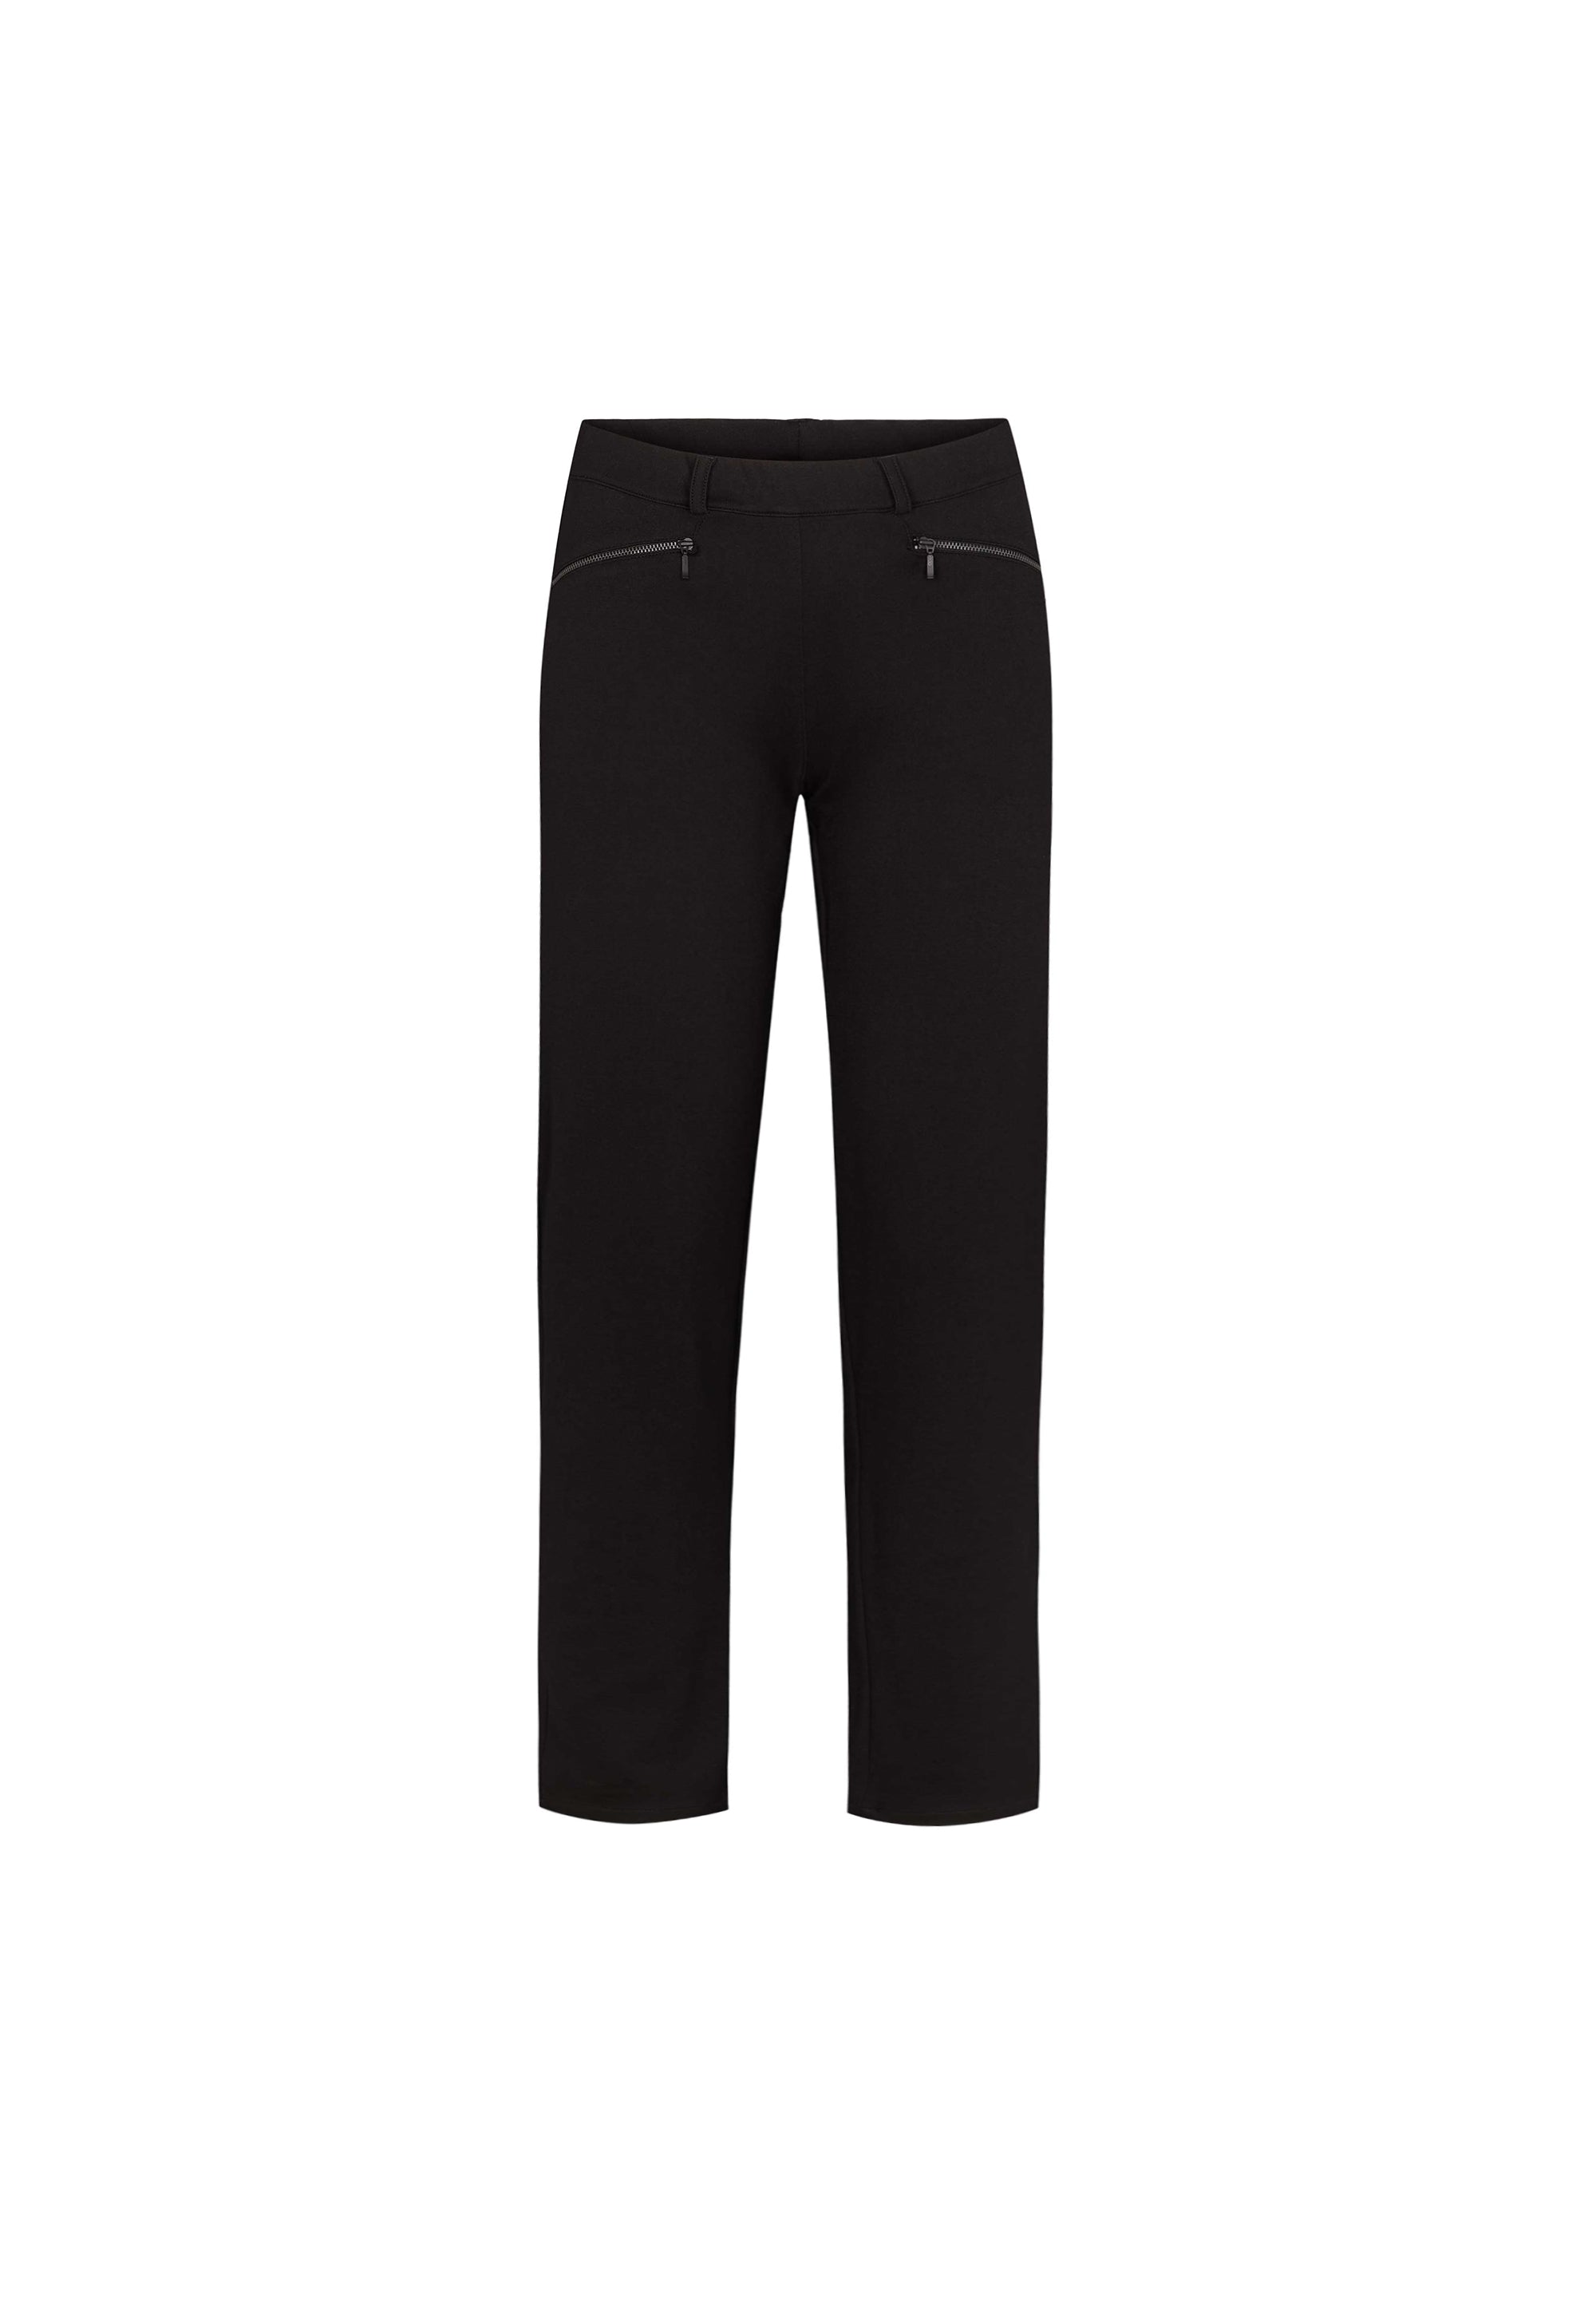 LAURIE Ruby Straight - Medium Length Trousers STRAIGHT 99143 Black brushed